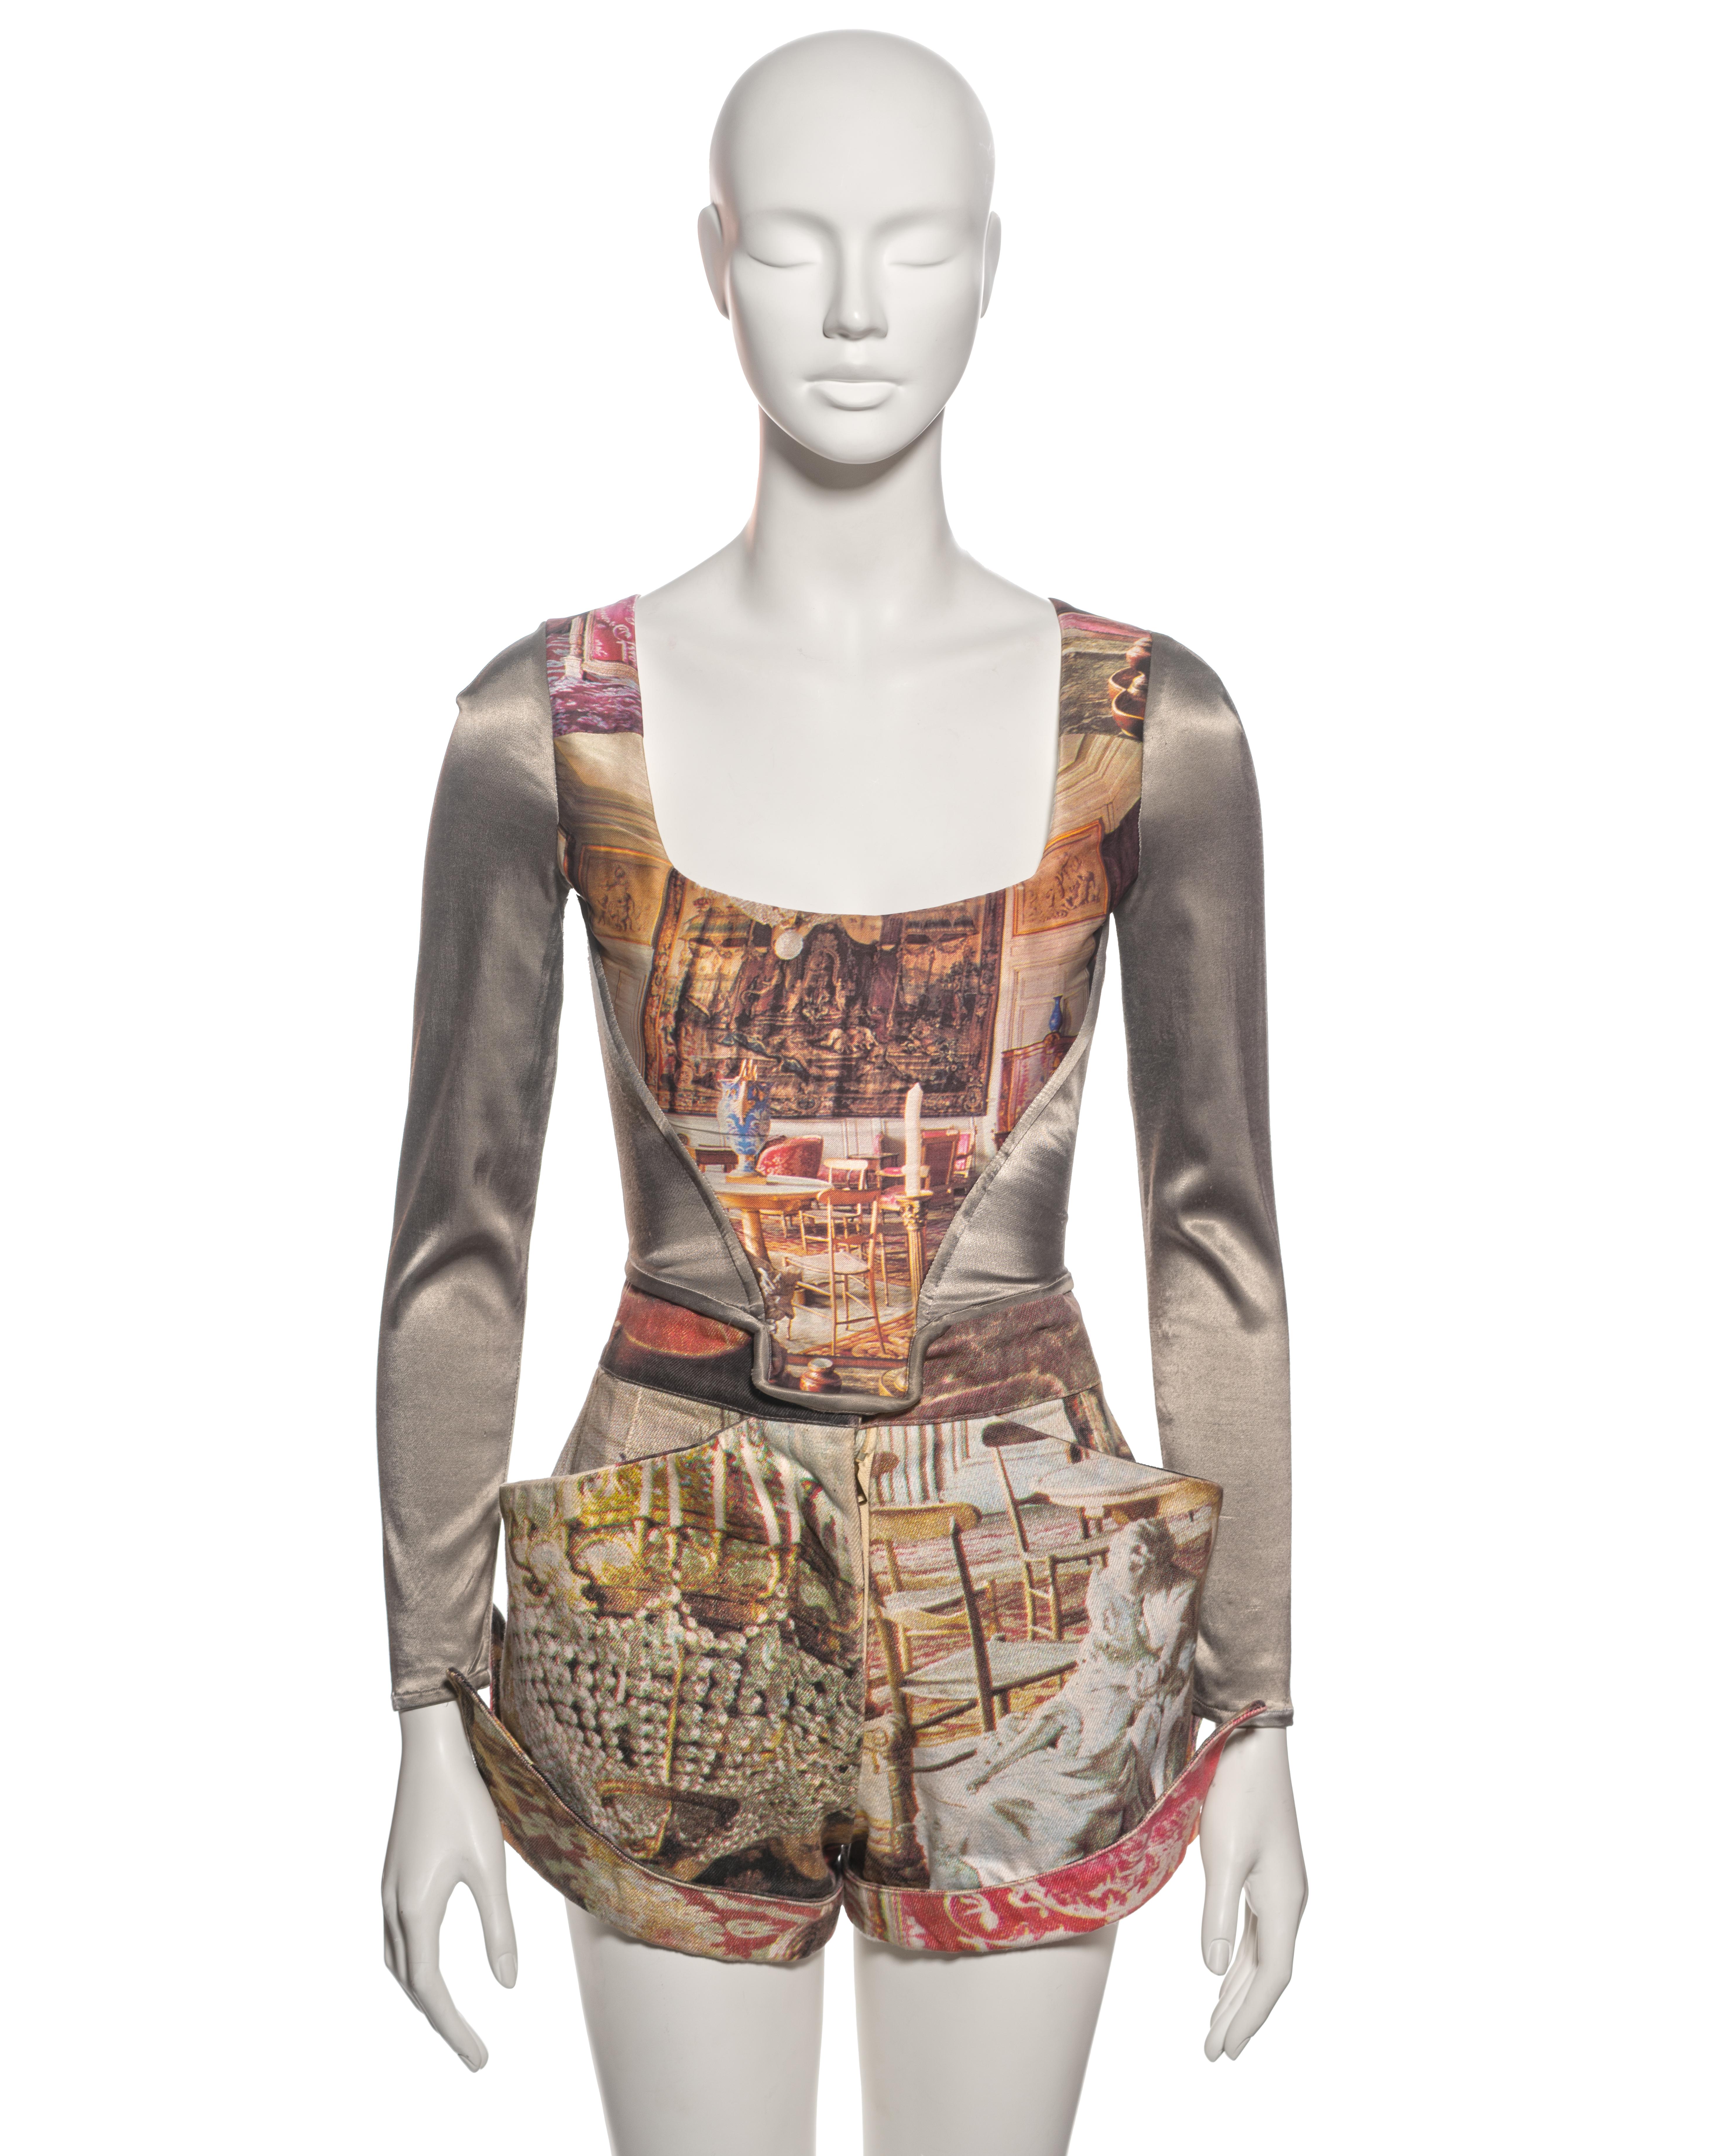 ▪ Archival Vivienne Westwood Corset and Shorts Set
▪ Spring-Summer 1992
▪ Sold by One of a Kind Archive
▪ Long sleeve corset with a photographic print to front and back, of an 18th-century salon
▪ Side panels and sleeves of silver-grey lycra
▪